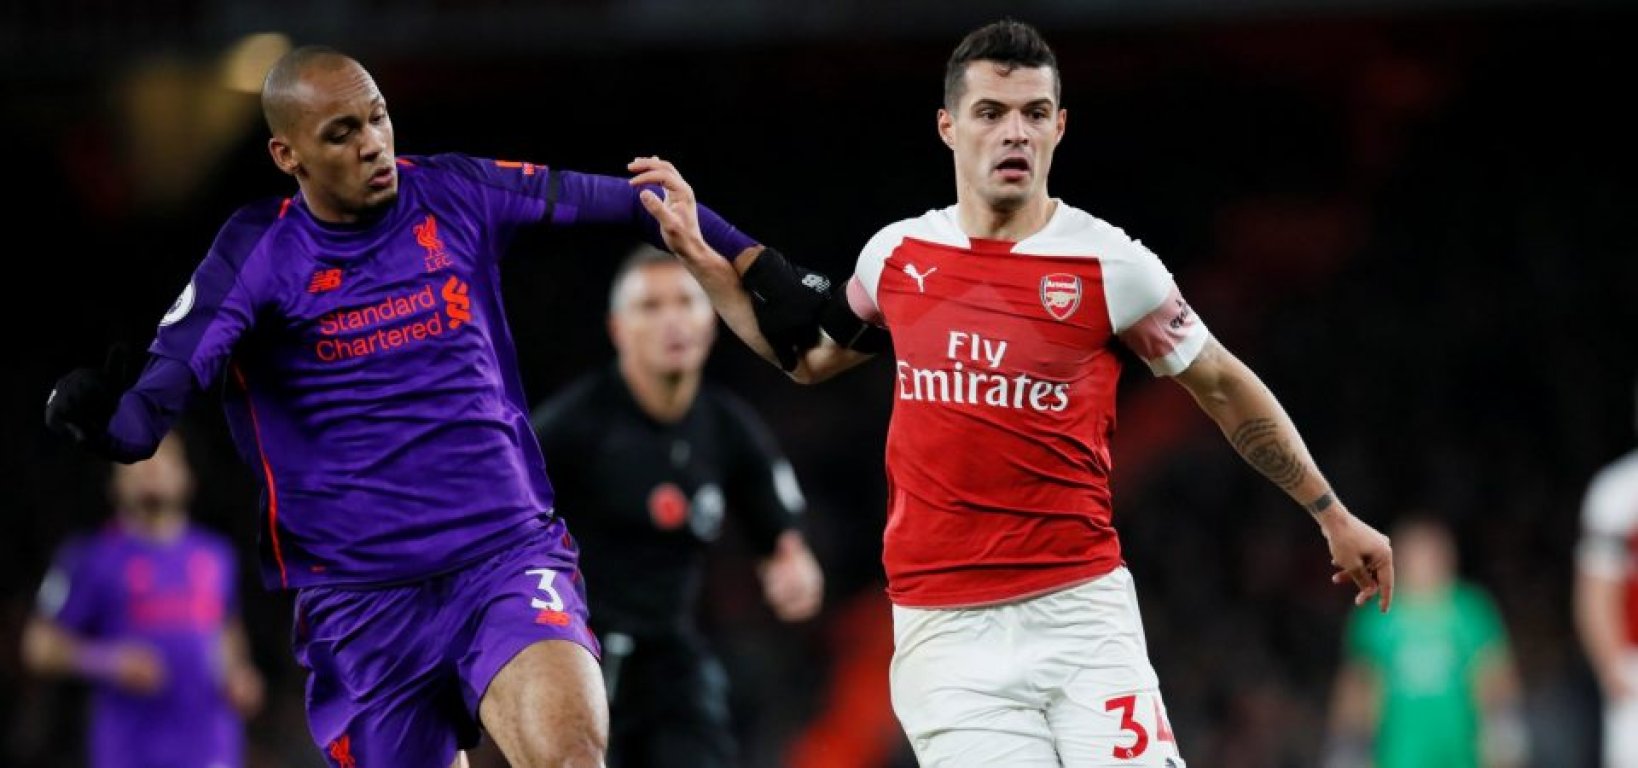 fabinho-challenges-granit-xhaka-for-the-ball-during-arsenal-v-liverpool-960x450